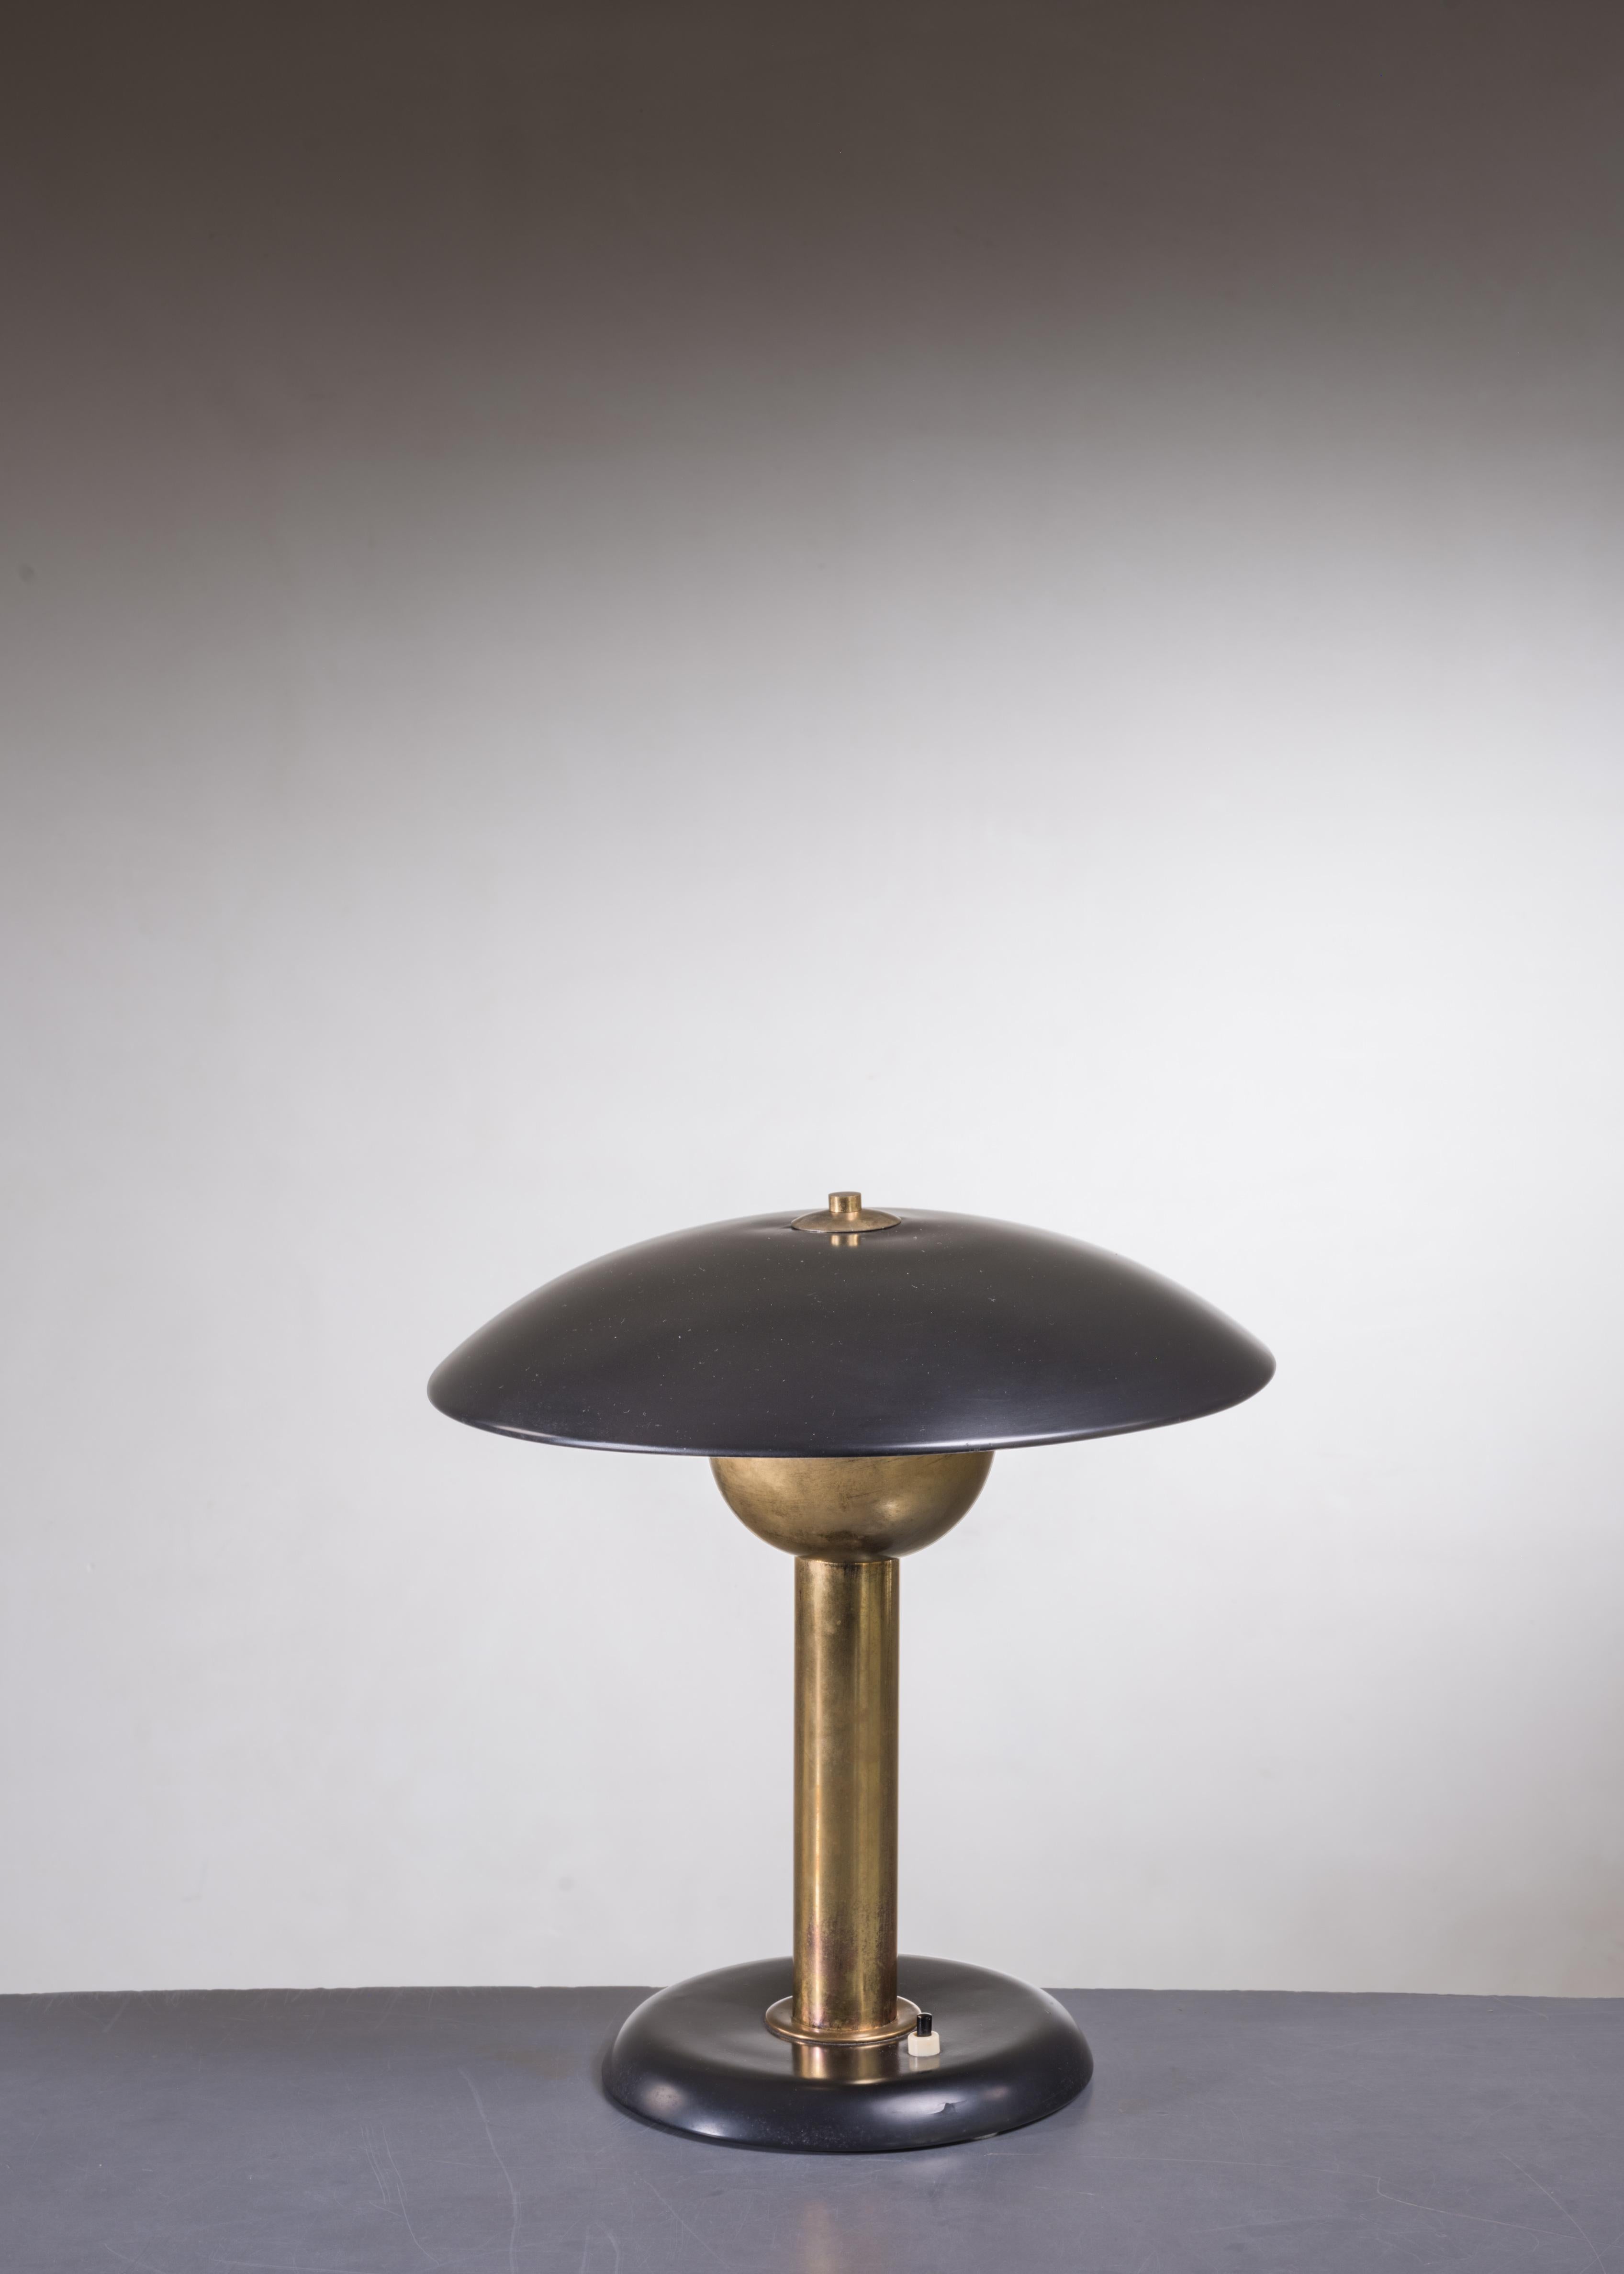 A Modernist Italian heavy brass table lamp with a black metal foot and shade.